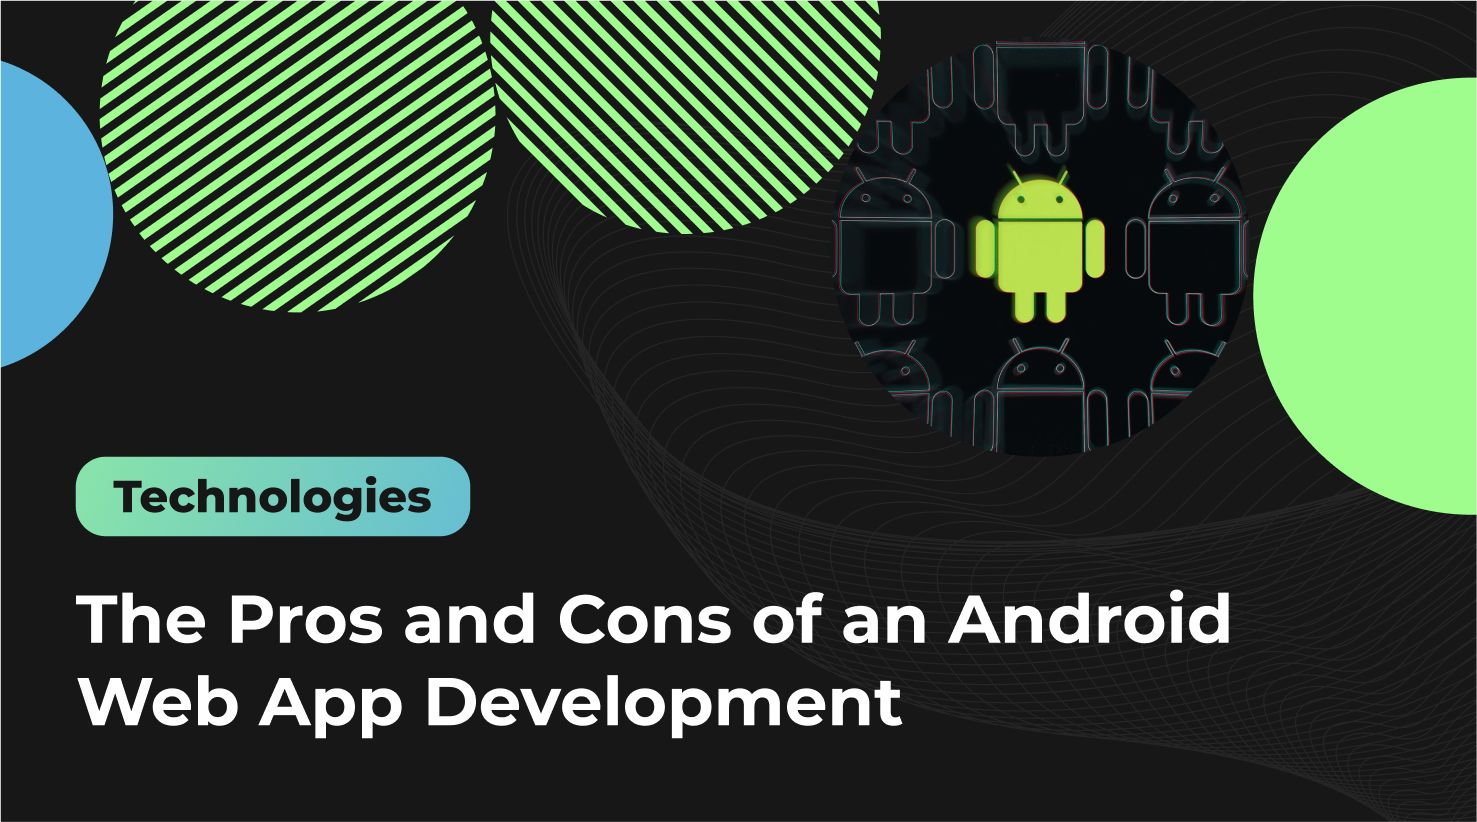 The Pros and Cons of an Android Web App Development